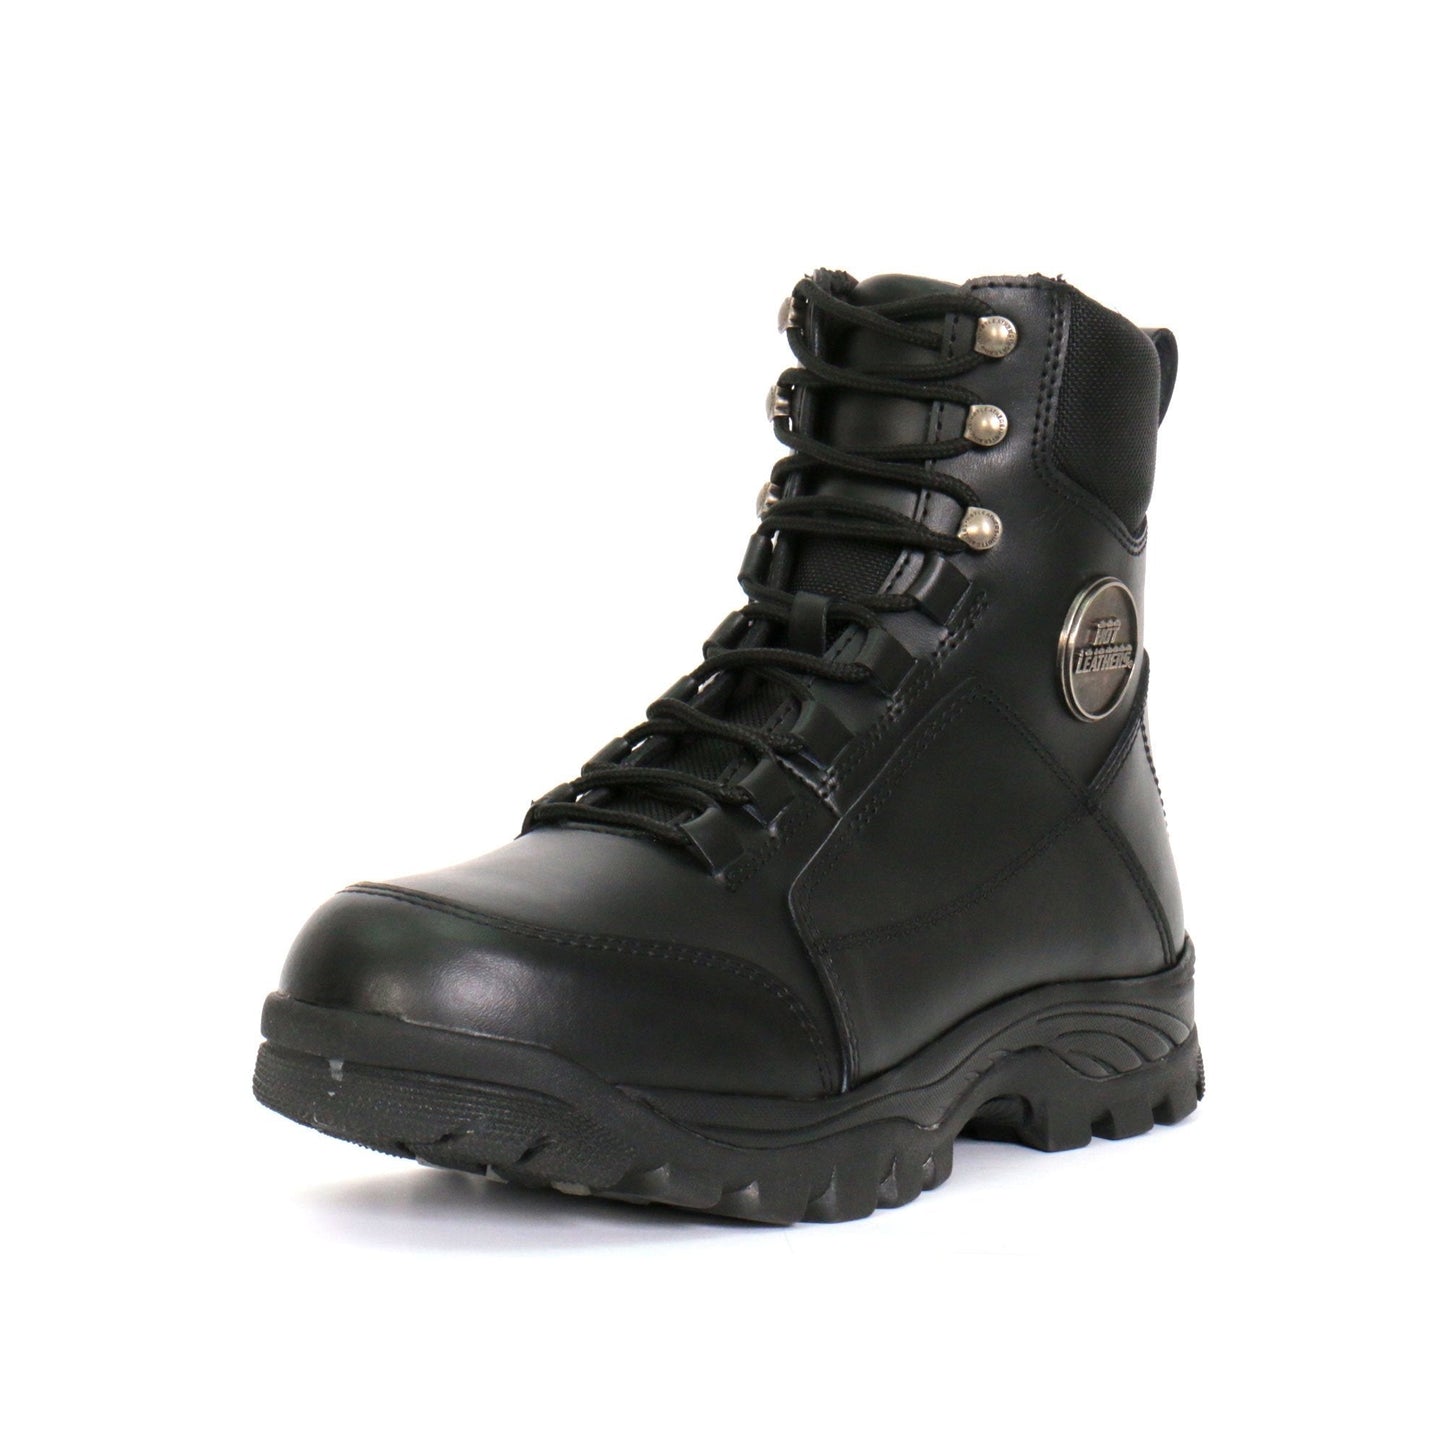 Men's Black Leather Swat Style Lace Up Boots